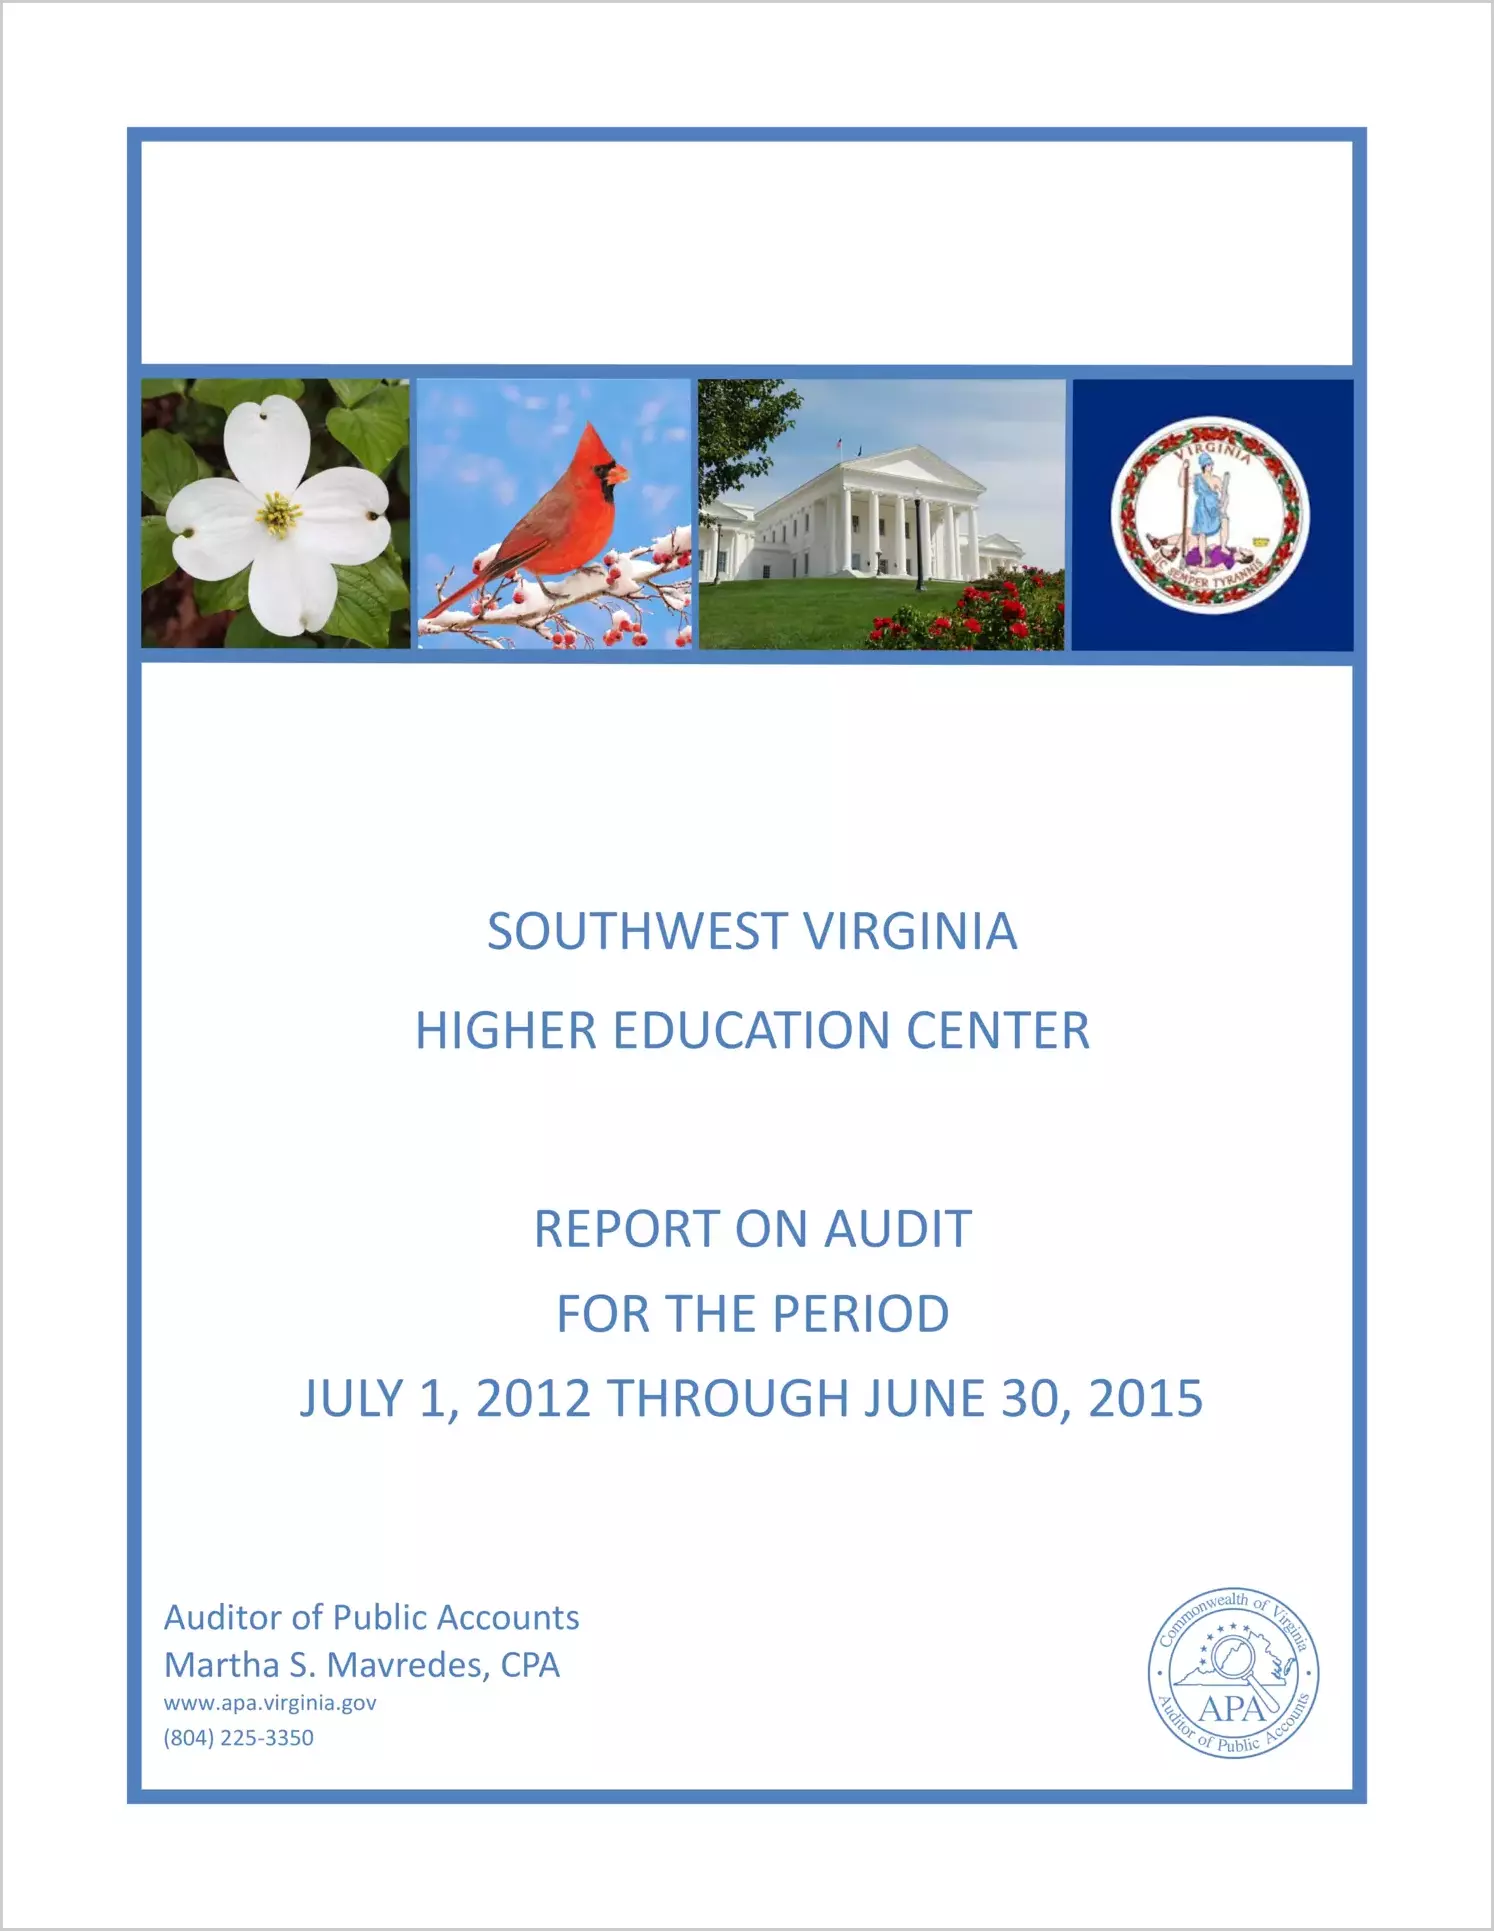 Southwest Virginia Higher Education Center for the period July 1, 2012 through June 30, 2015